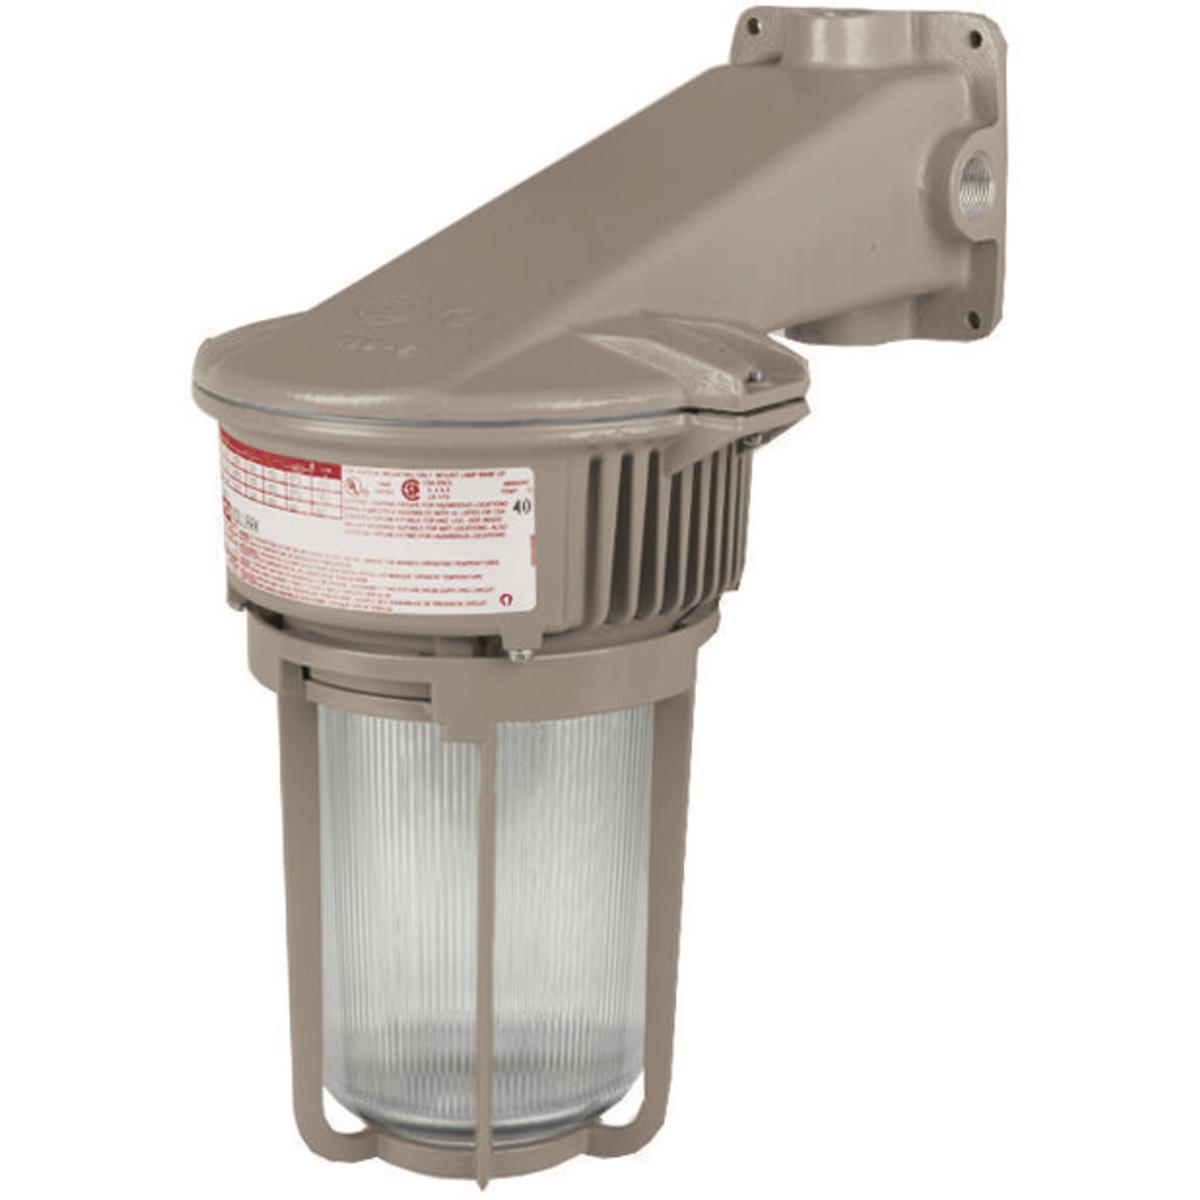 Hubbell MBL2530B2R5G MBL 120-277V 3/4" Wall Bracket Mount Glass Type 5 Refractor with Guard  ; The MBL Series is a compact low bay energy efficient LED. The design of the MBL makes it suitable for harsh and hazardous environments using a cast copper-free aluminum. Its low pro